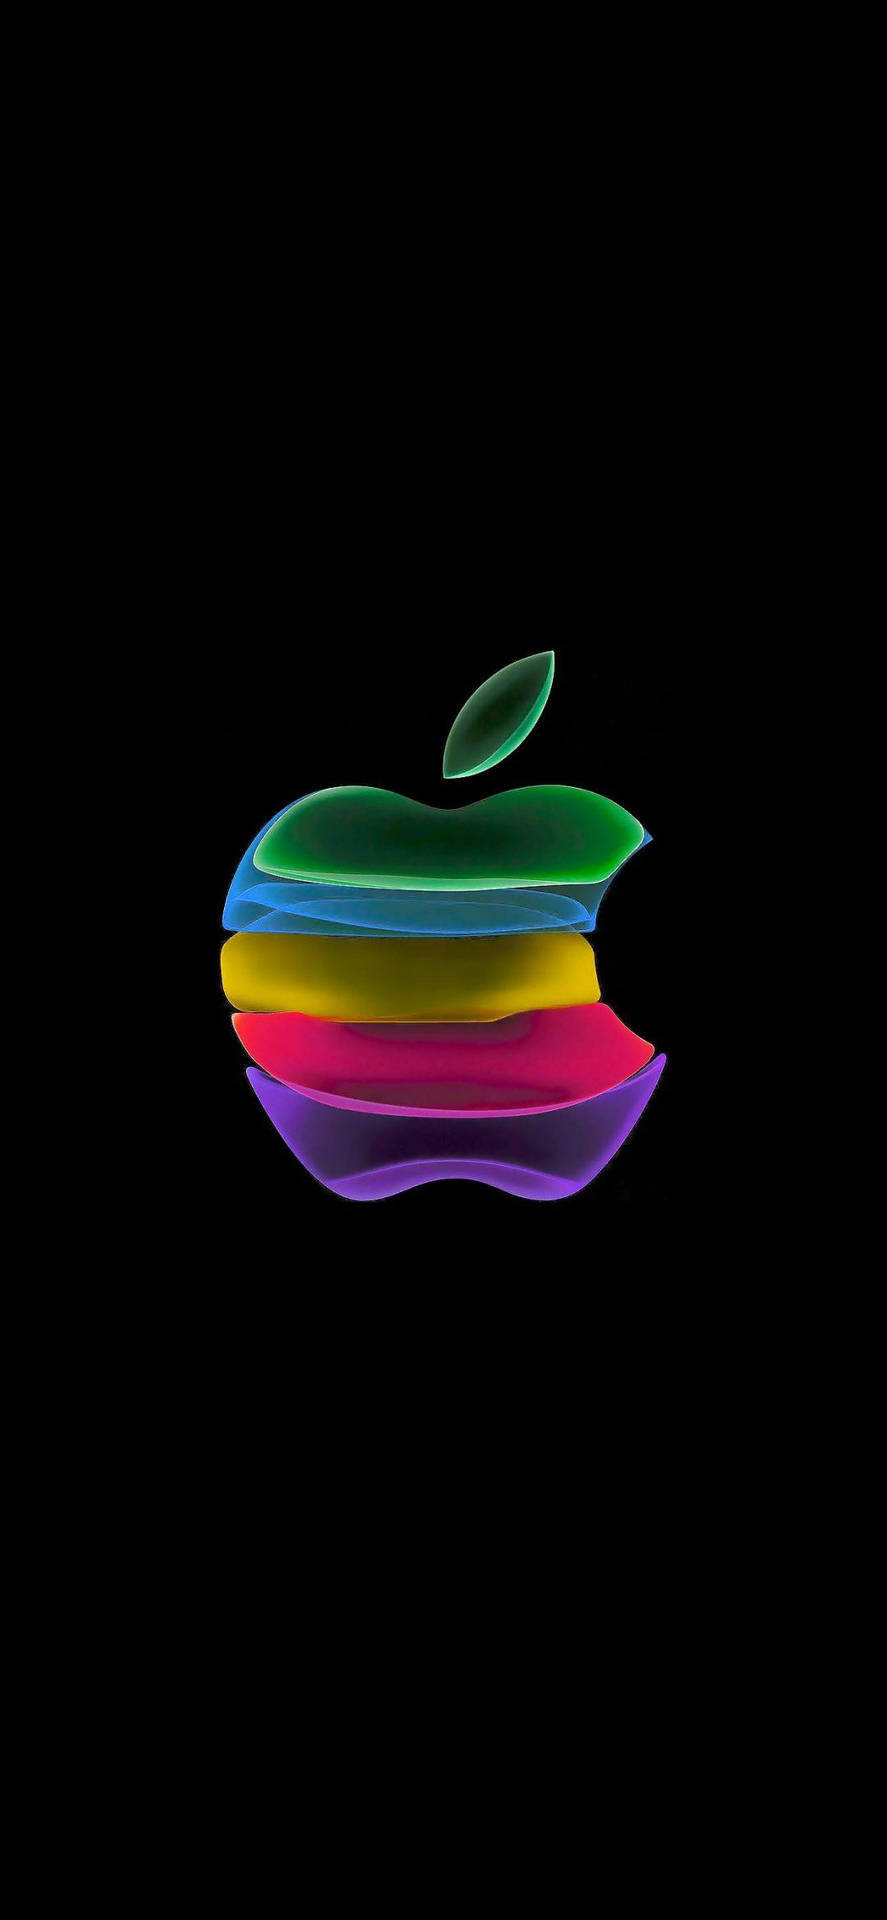 Colorful 3d Apple Iphone Logo